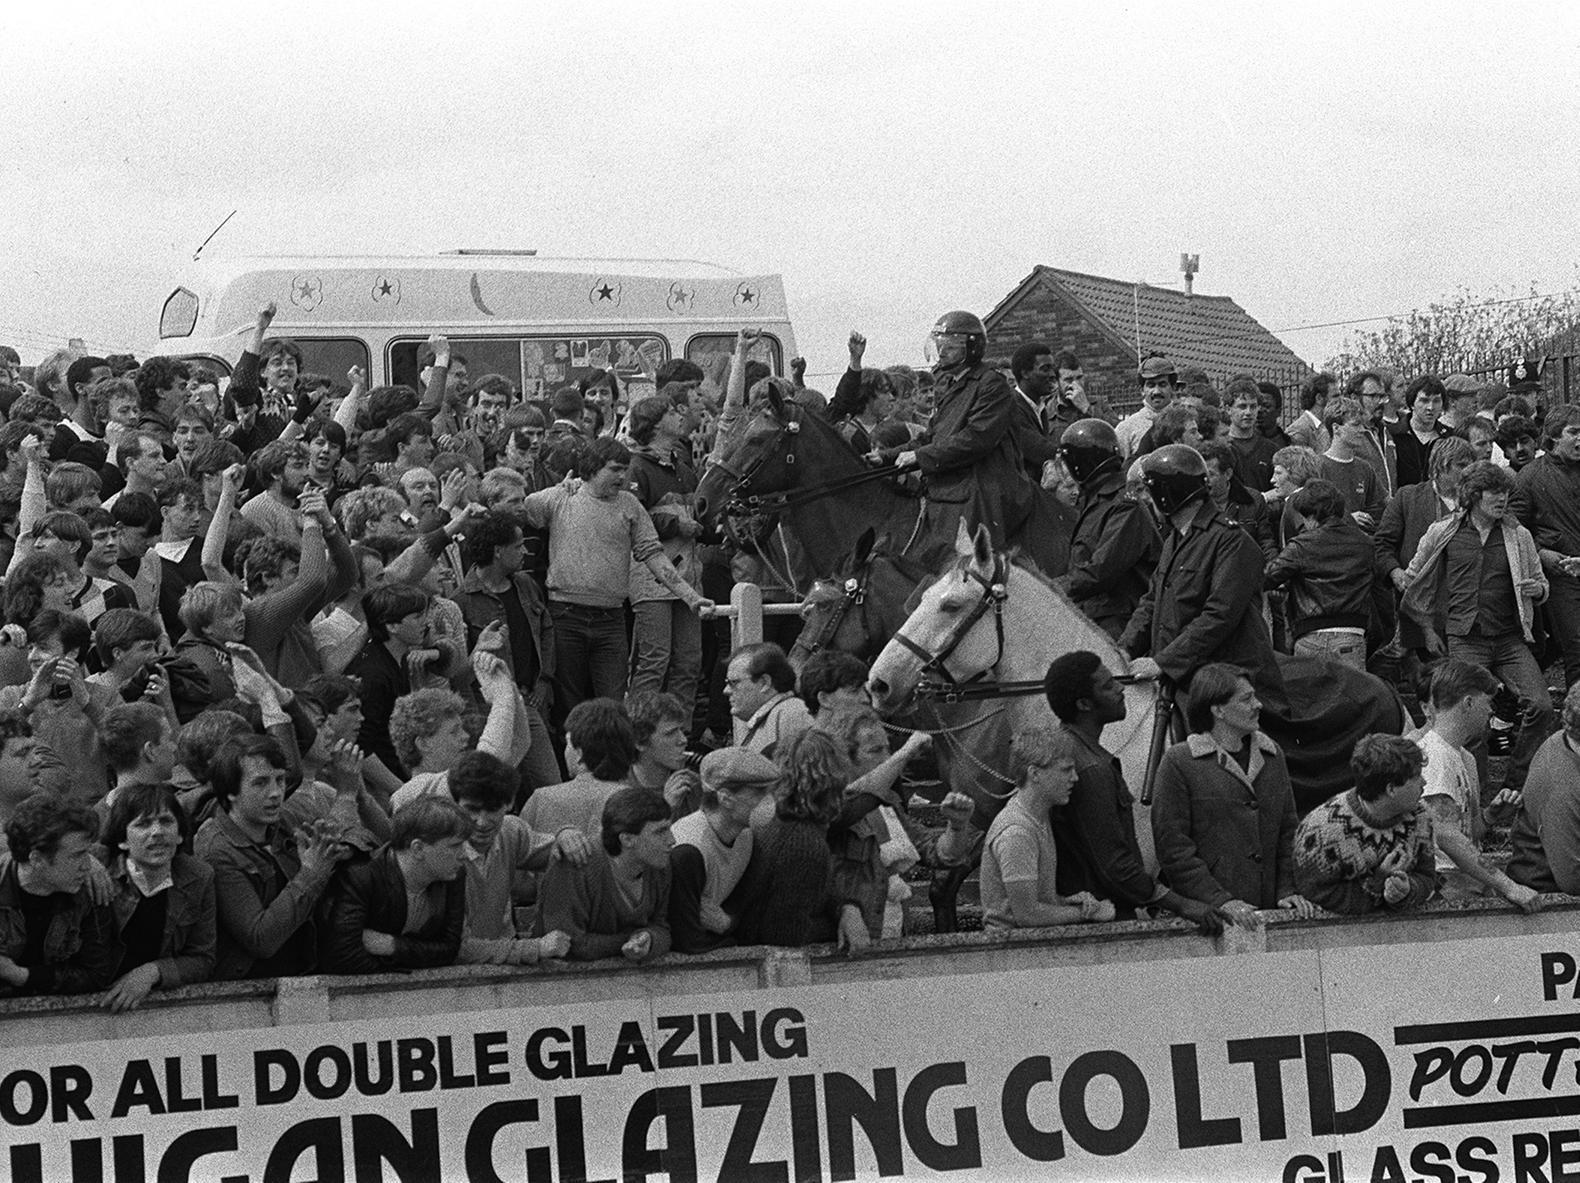 The away end was lively when PNE visited Springfield Park in May 1983 - and you could buy an ice cream from the van at the back of the terrace